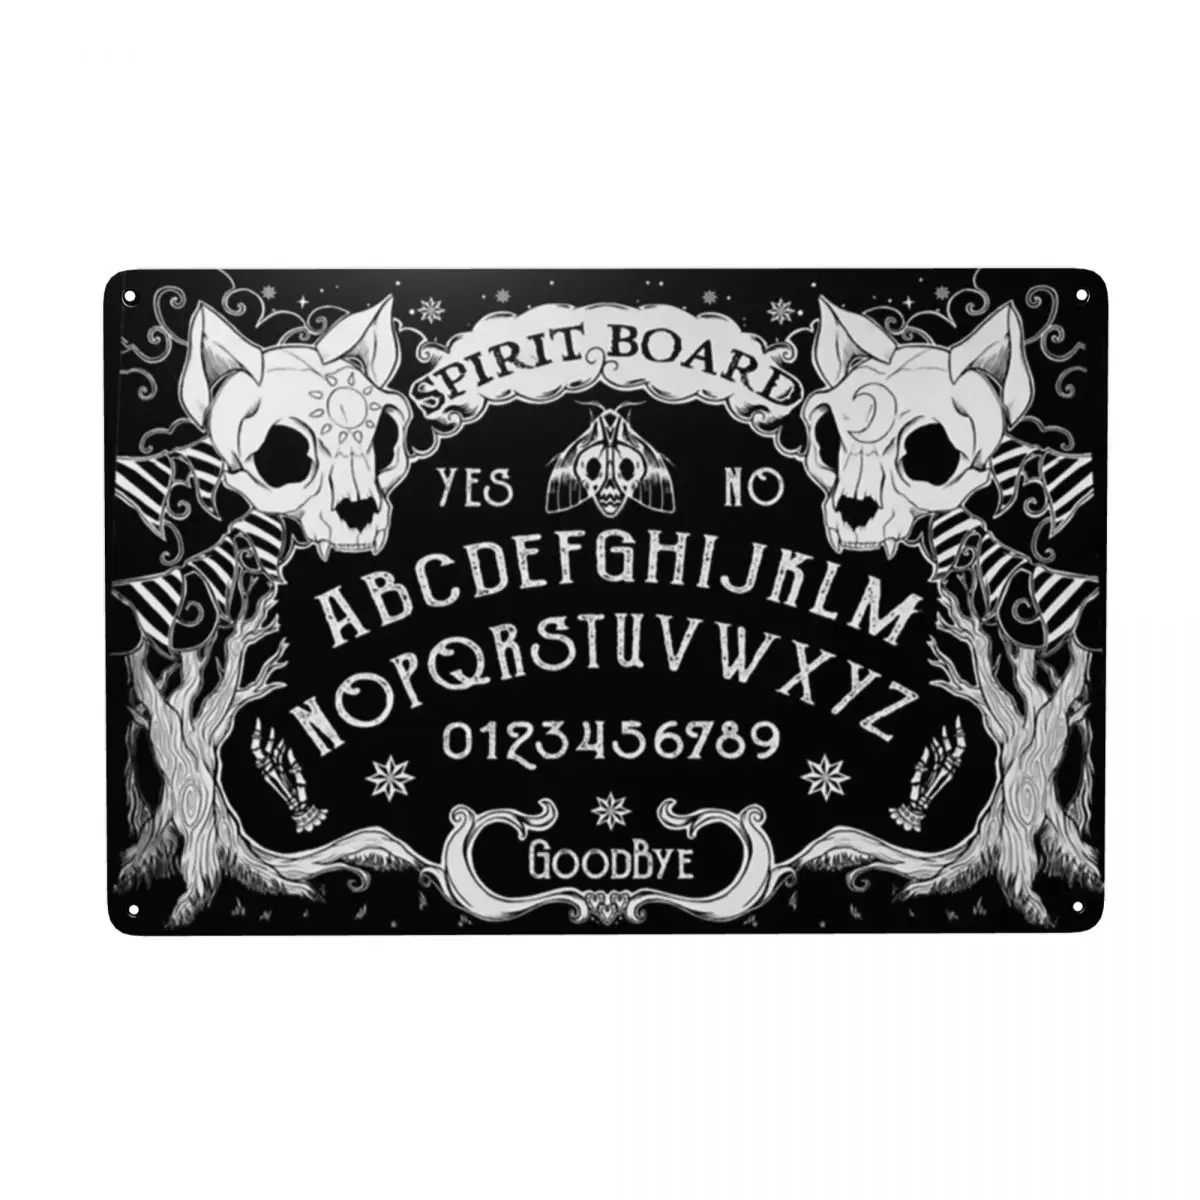 

Vintage Ouija Board Witchcraft Metal Signs Custom Divination Welcome Tin Plaque Gate Garden Bars Wall Art Decor 12x8inch